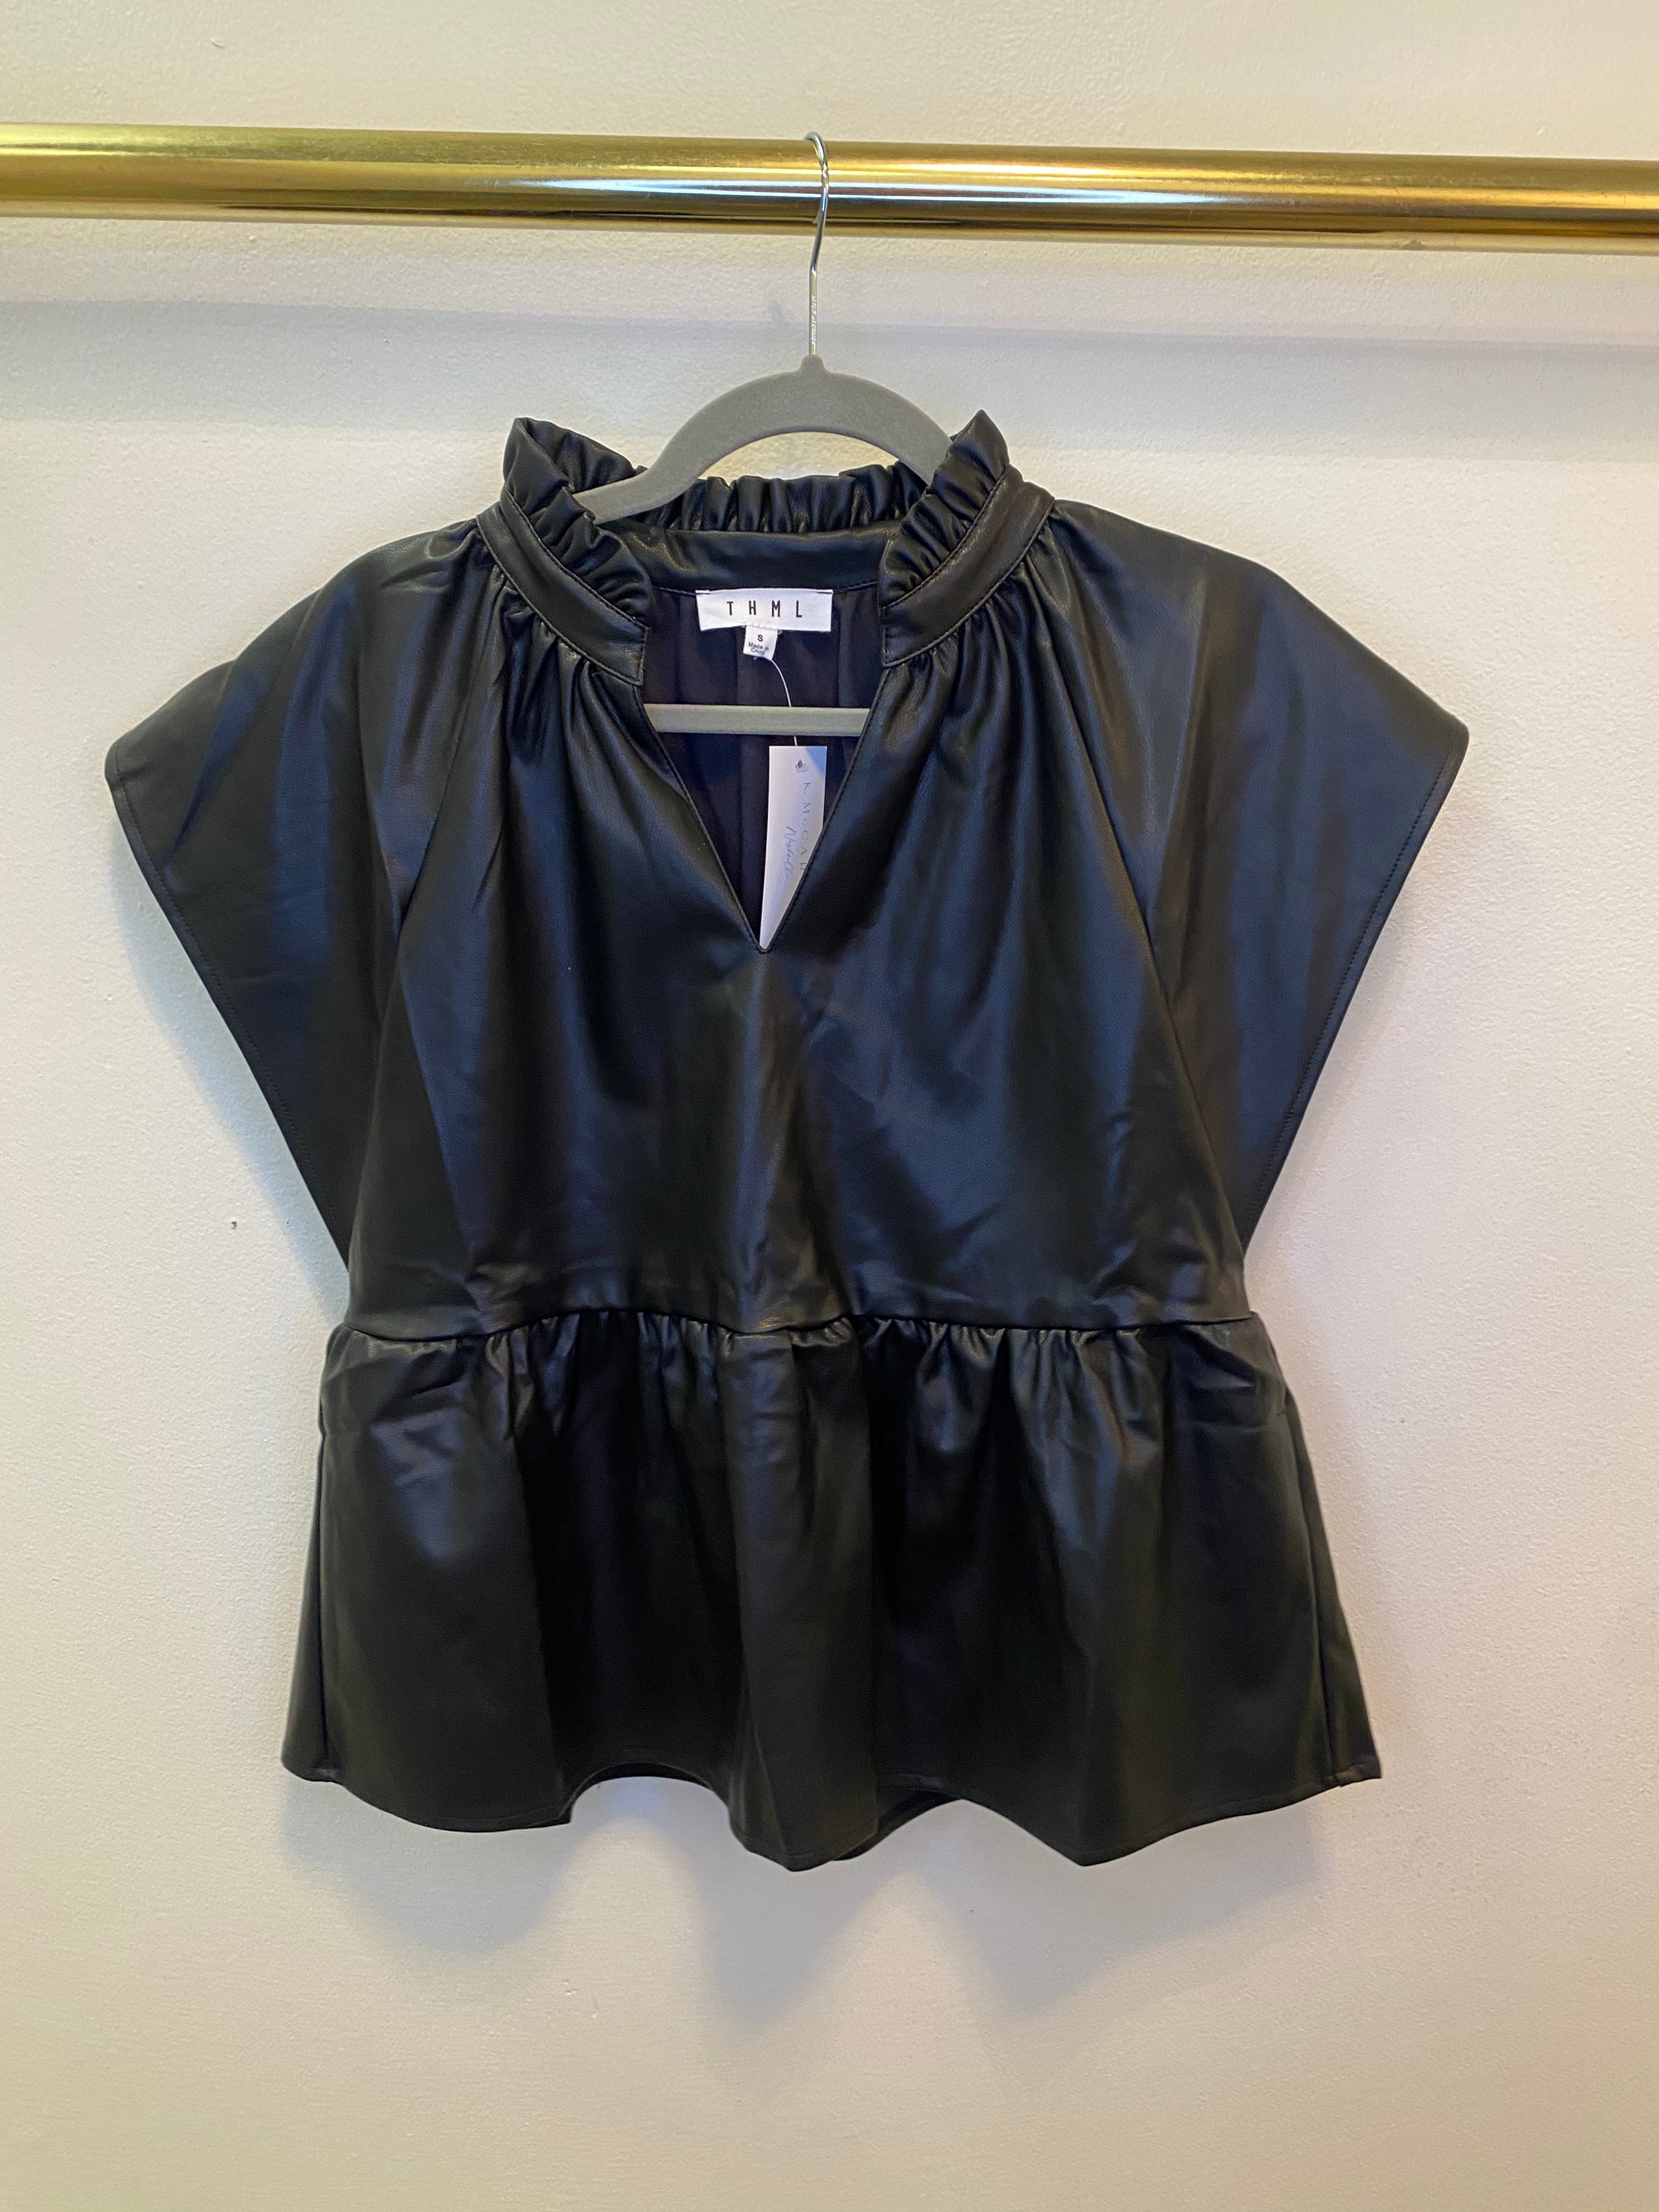 Short Sleeve Leather Top